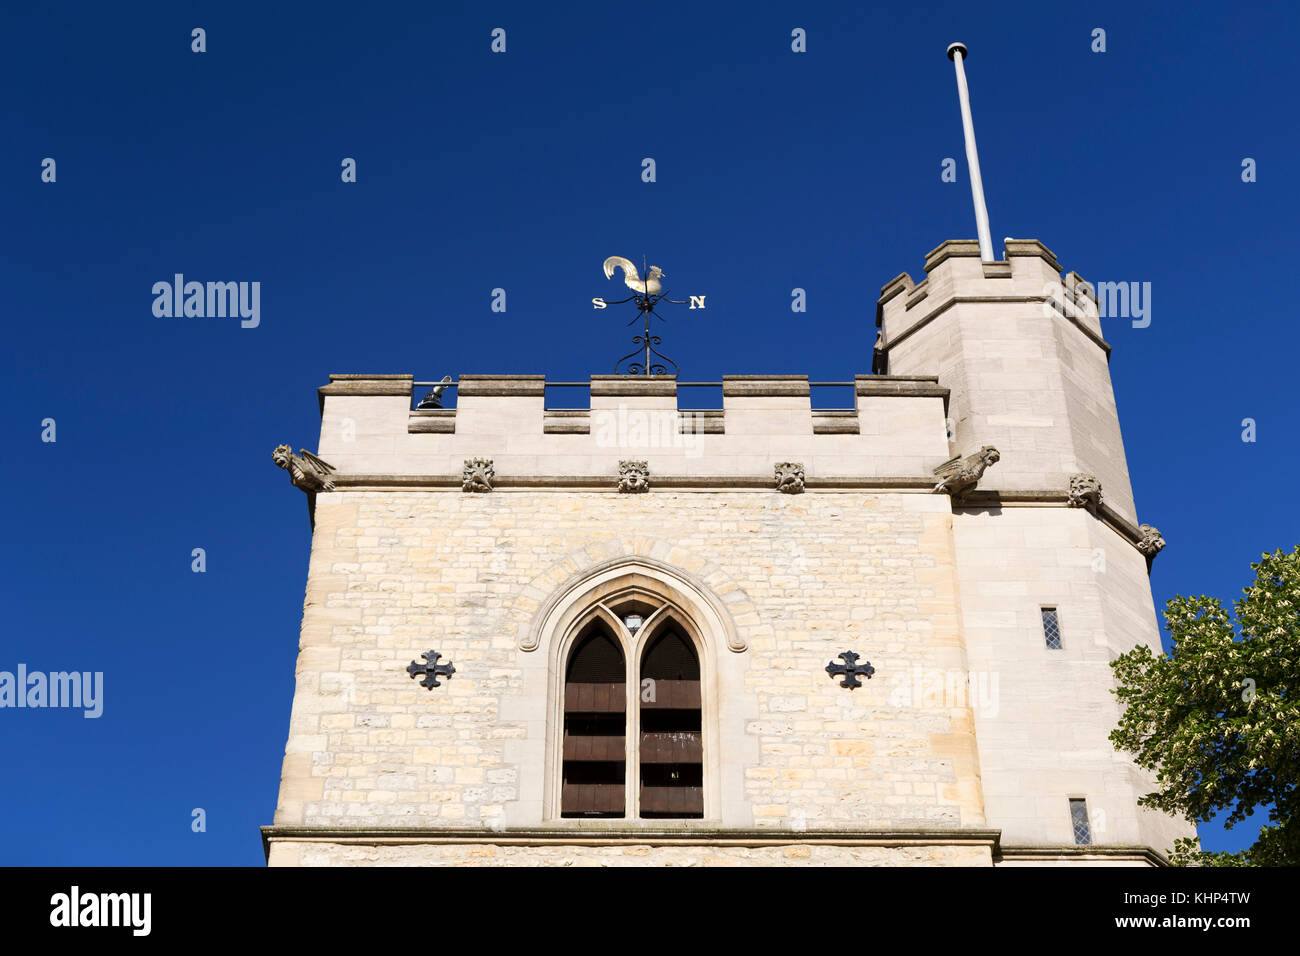 UK, Oxford, the Carfax tower. Stock Photo